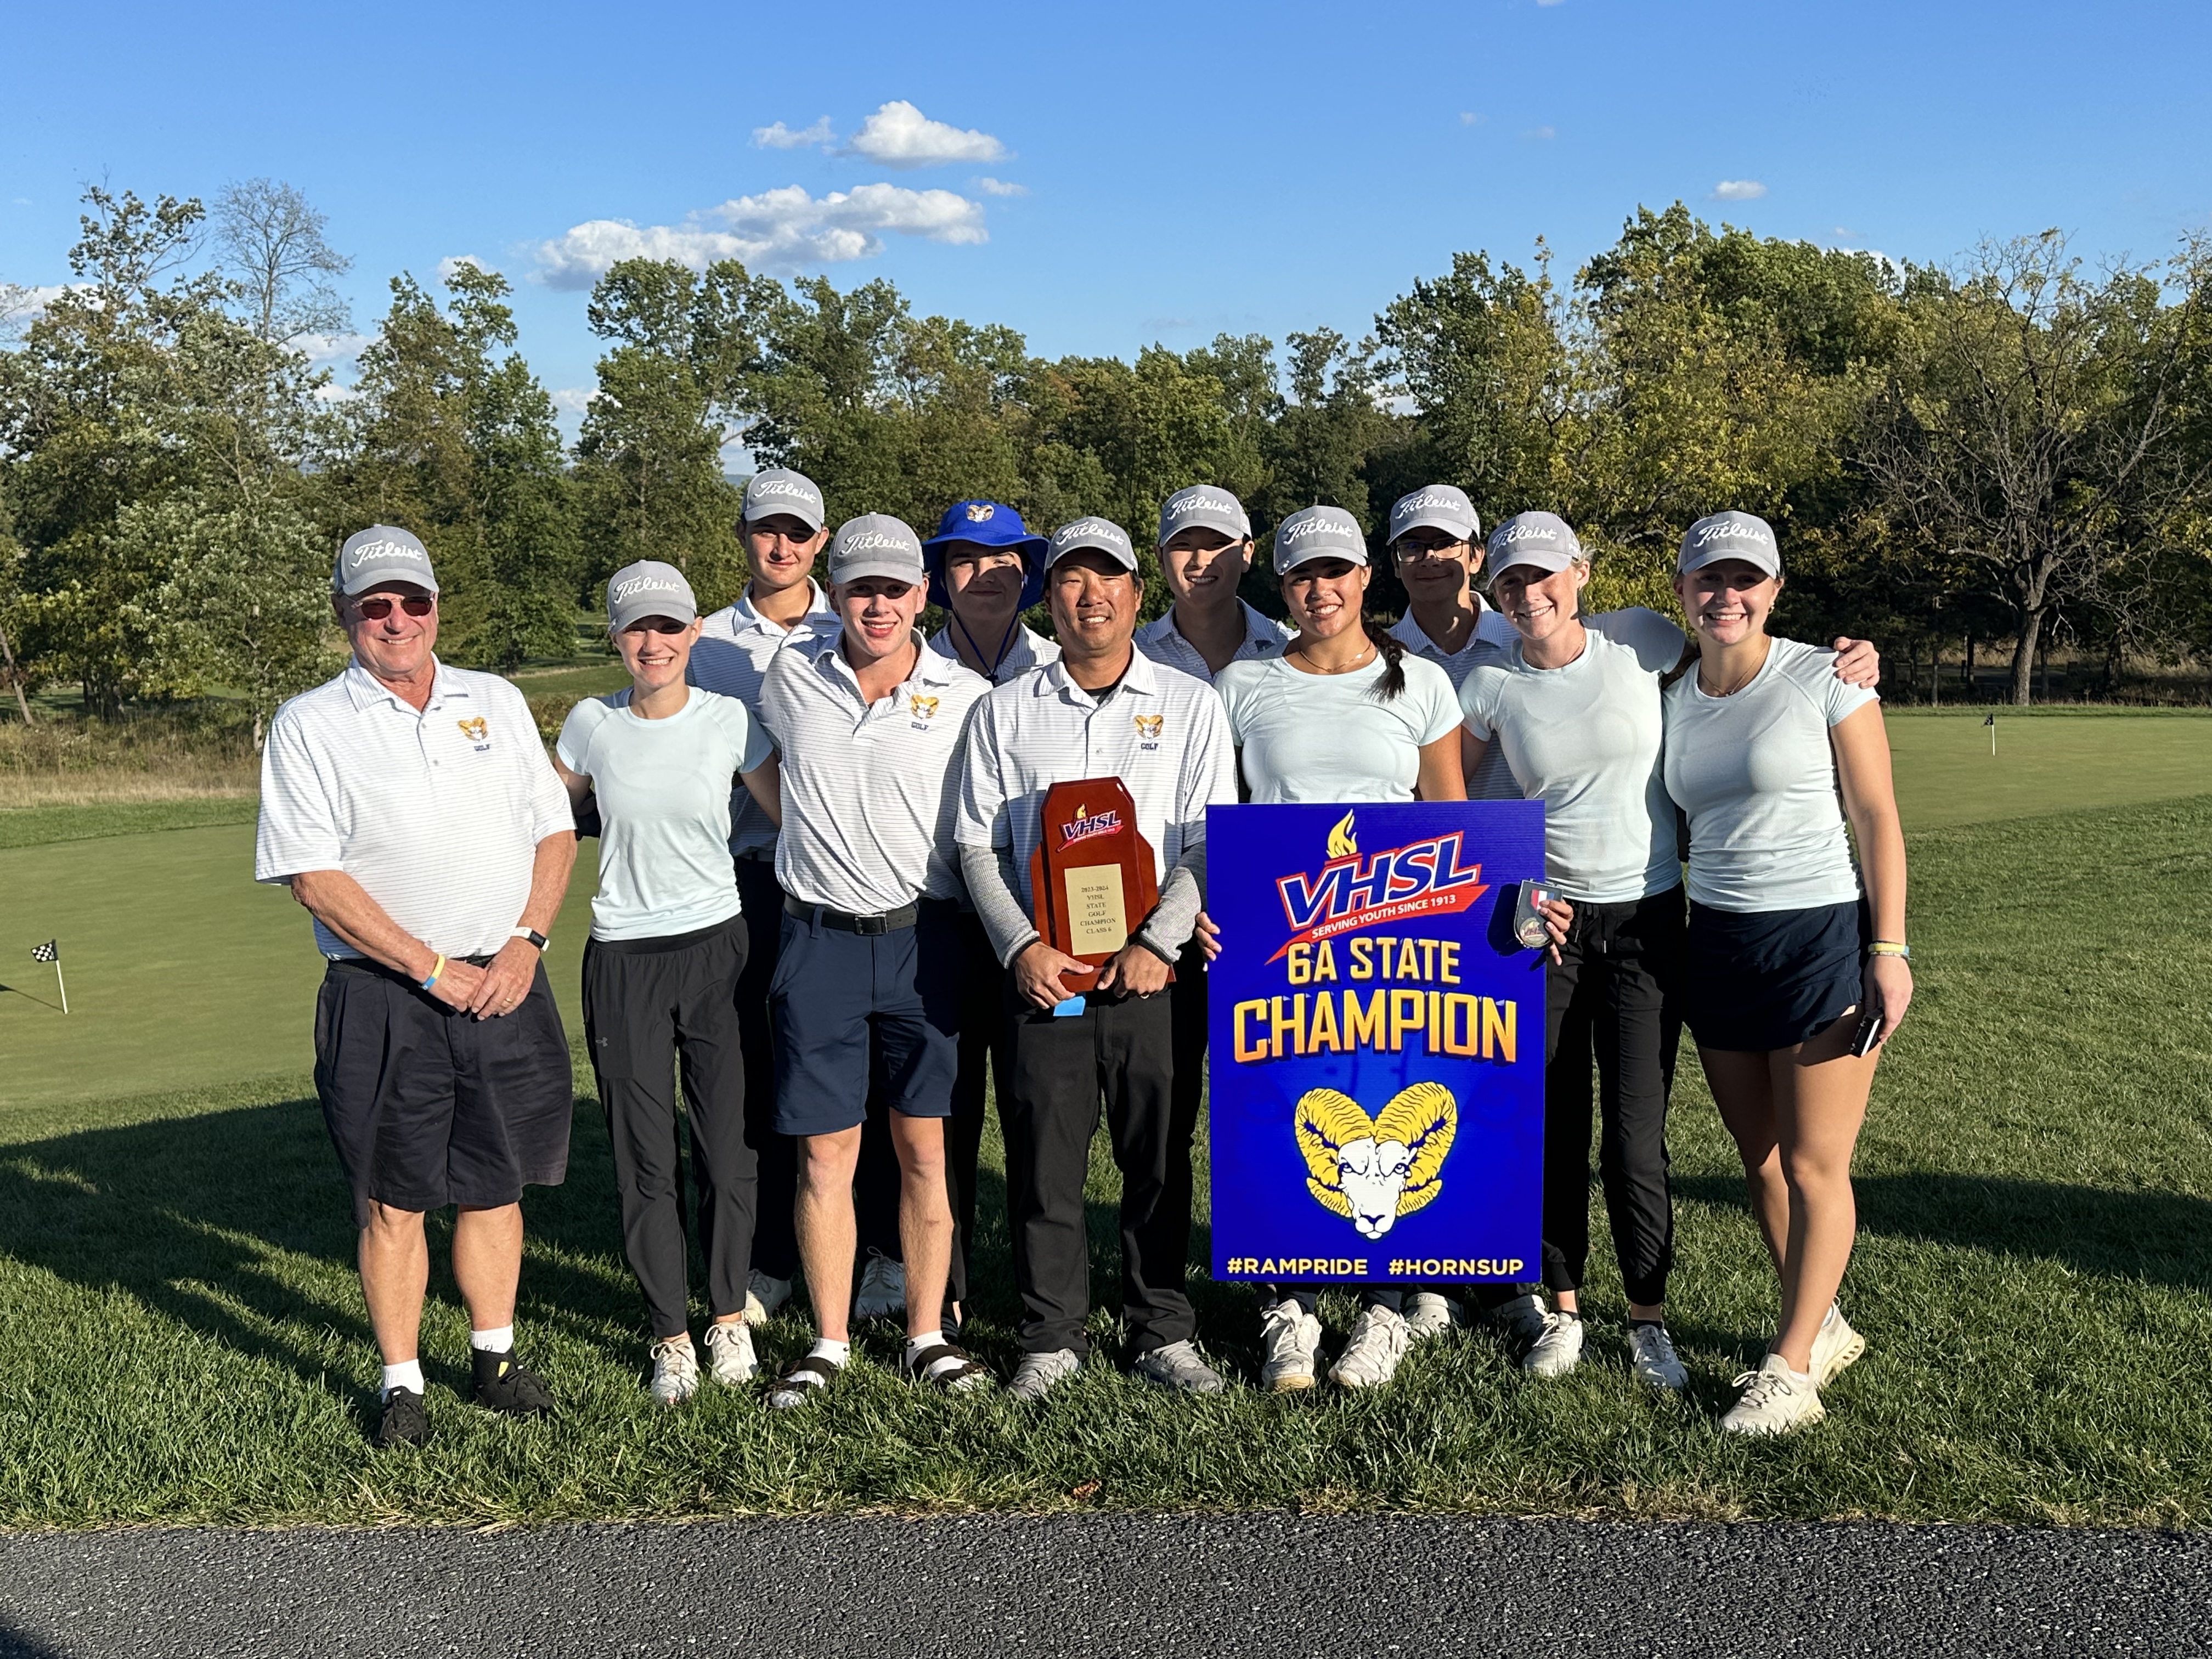 Coed Golf team posing for picture after winning state title